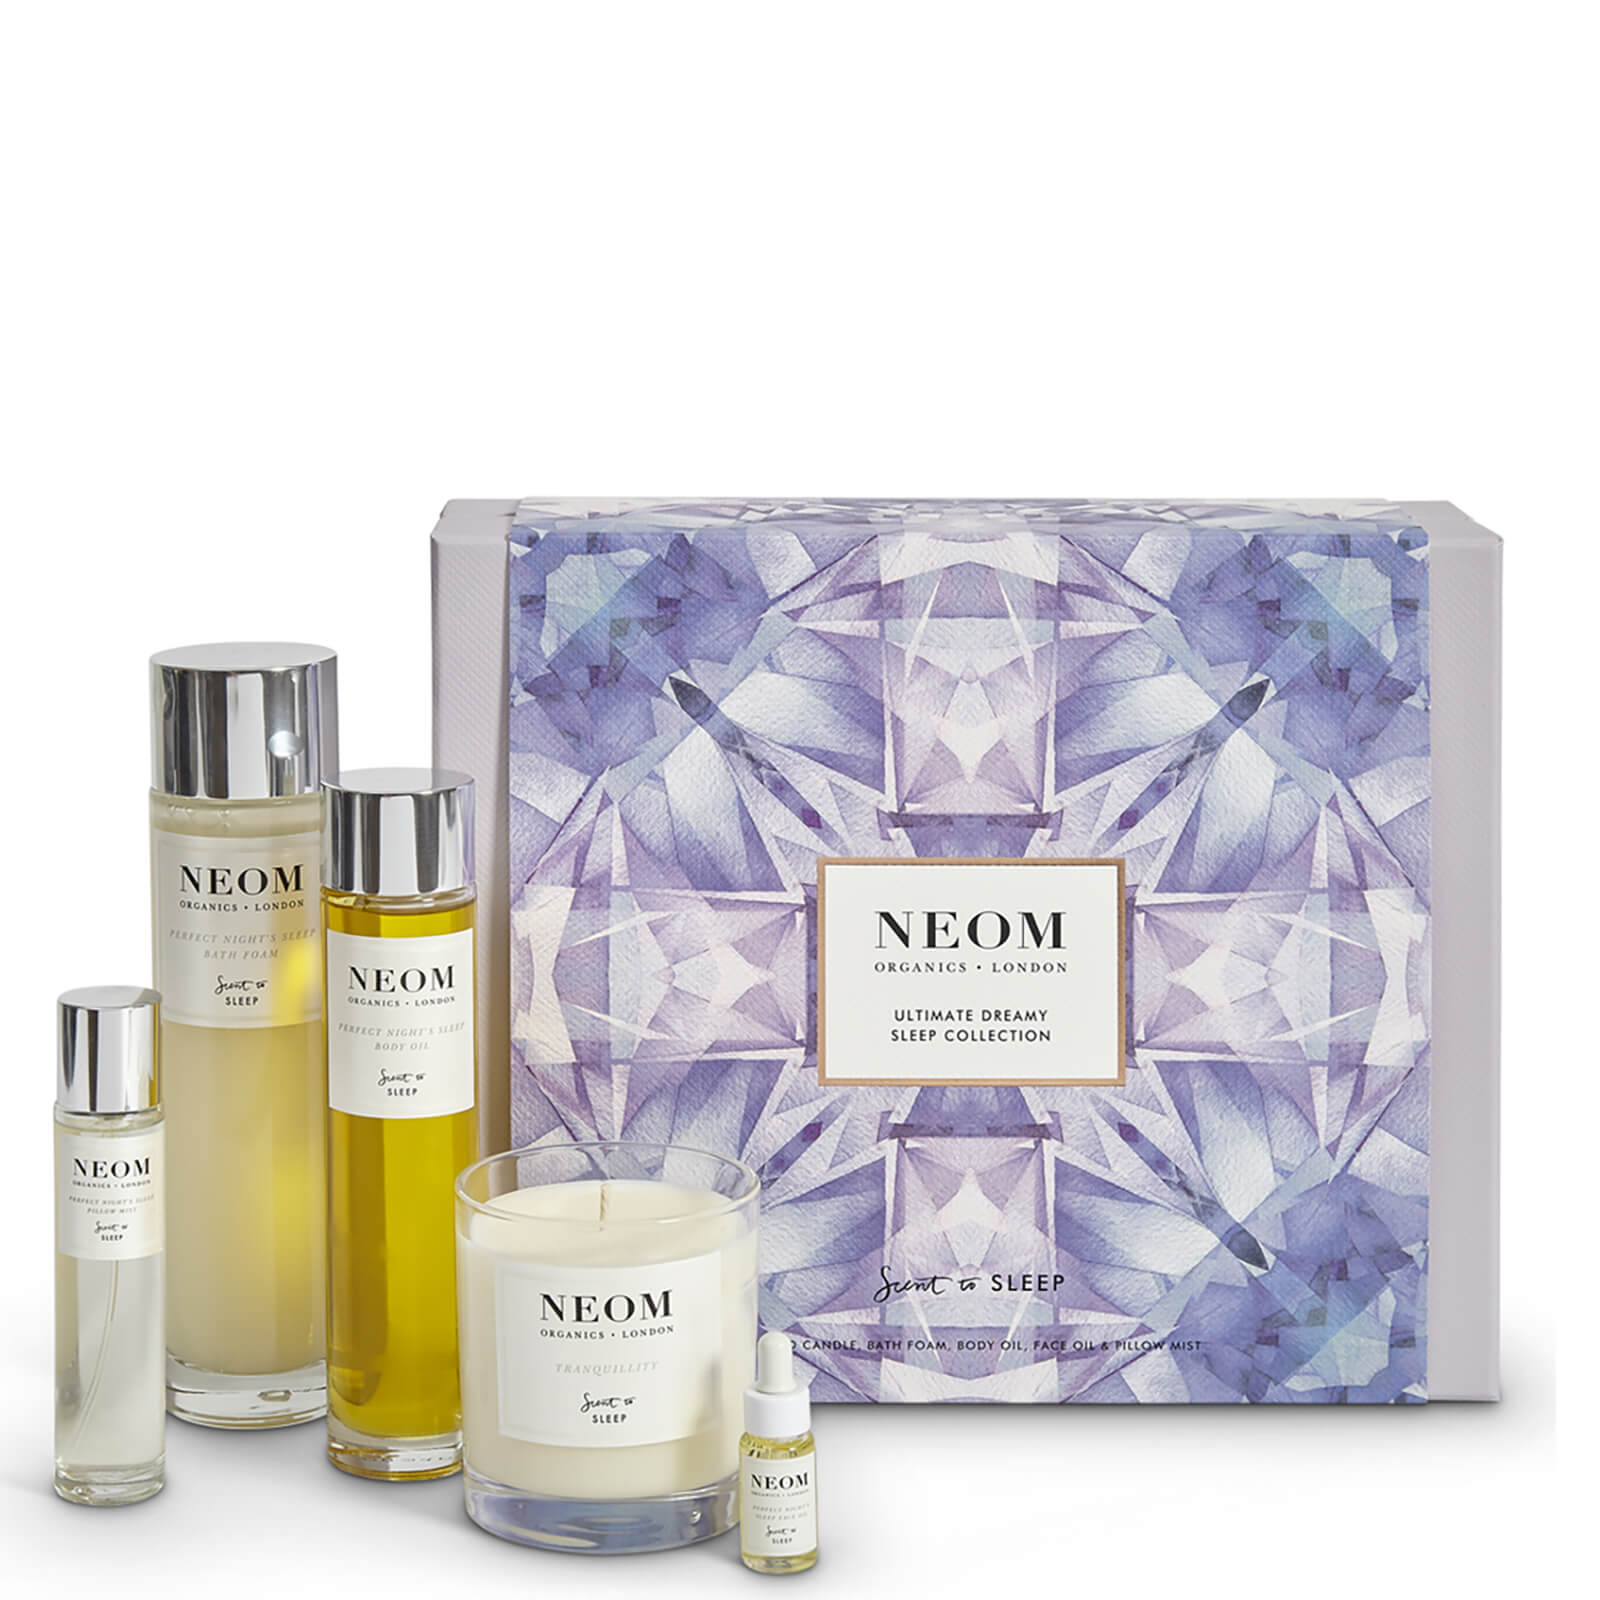 NEOM Ultimate Dreamy Sleep Collection